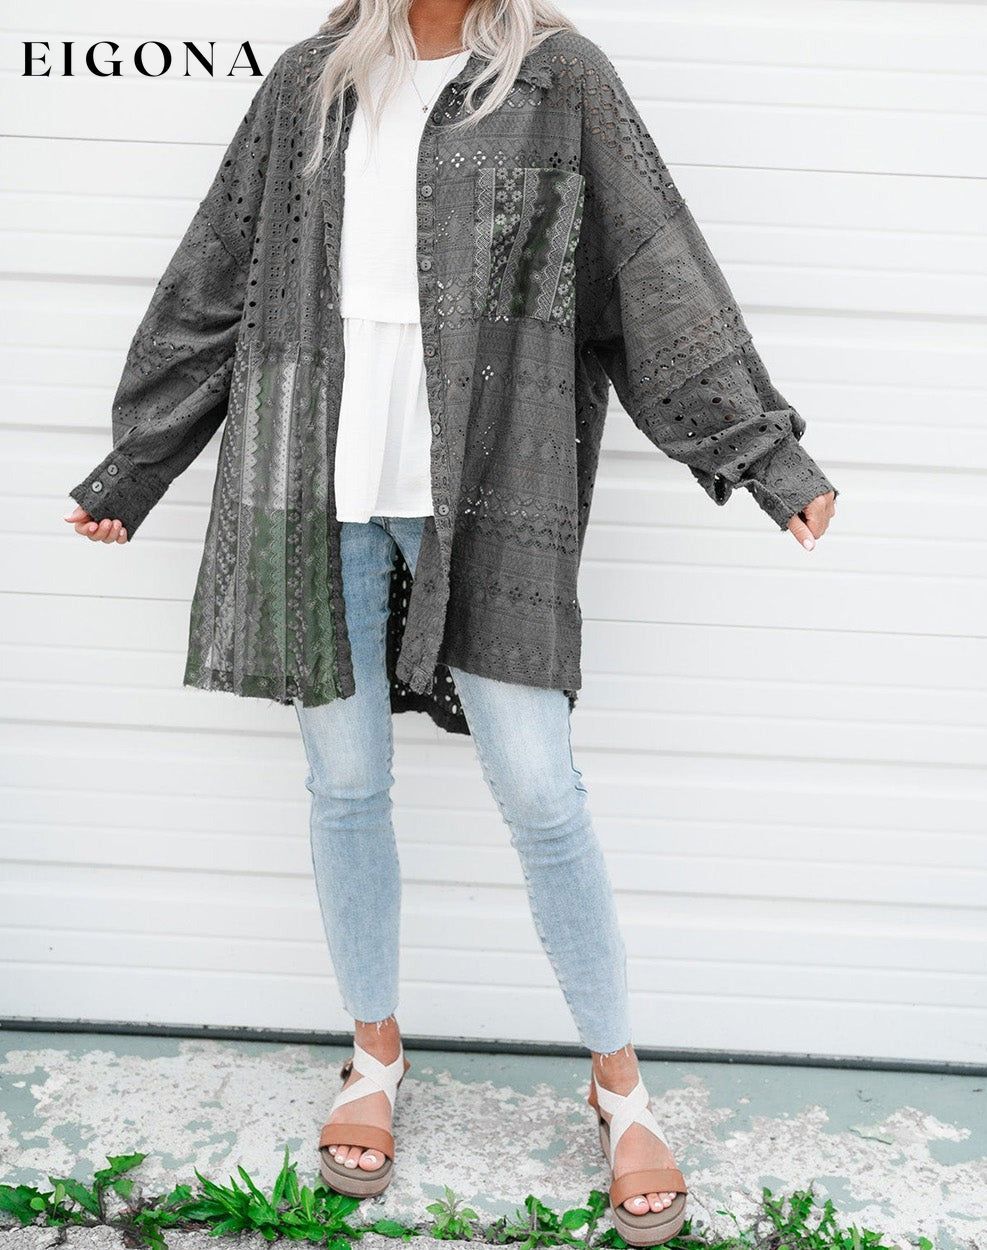 Duffel Green Eyelet Pattern Patchwork Oversized Button Up Shacket All In Stock clothes Craft Embroidery long sleeve shirt long sleeve shirts long sleeve top long sleeve tops Outerwear Print Solid Color Season Fall & Autumn shirt shirts Style Western top tops